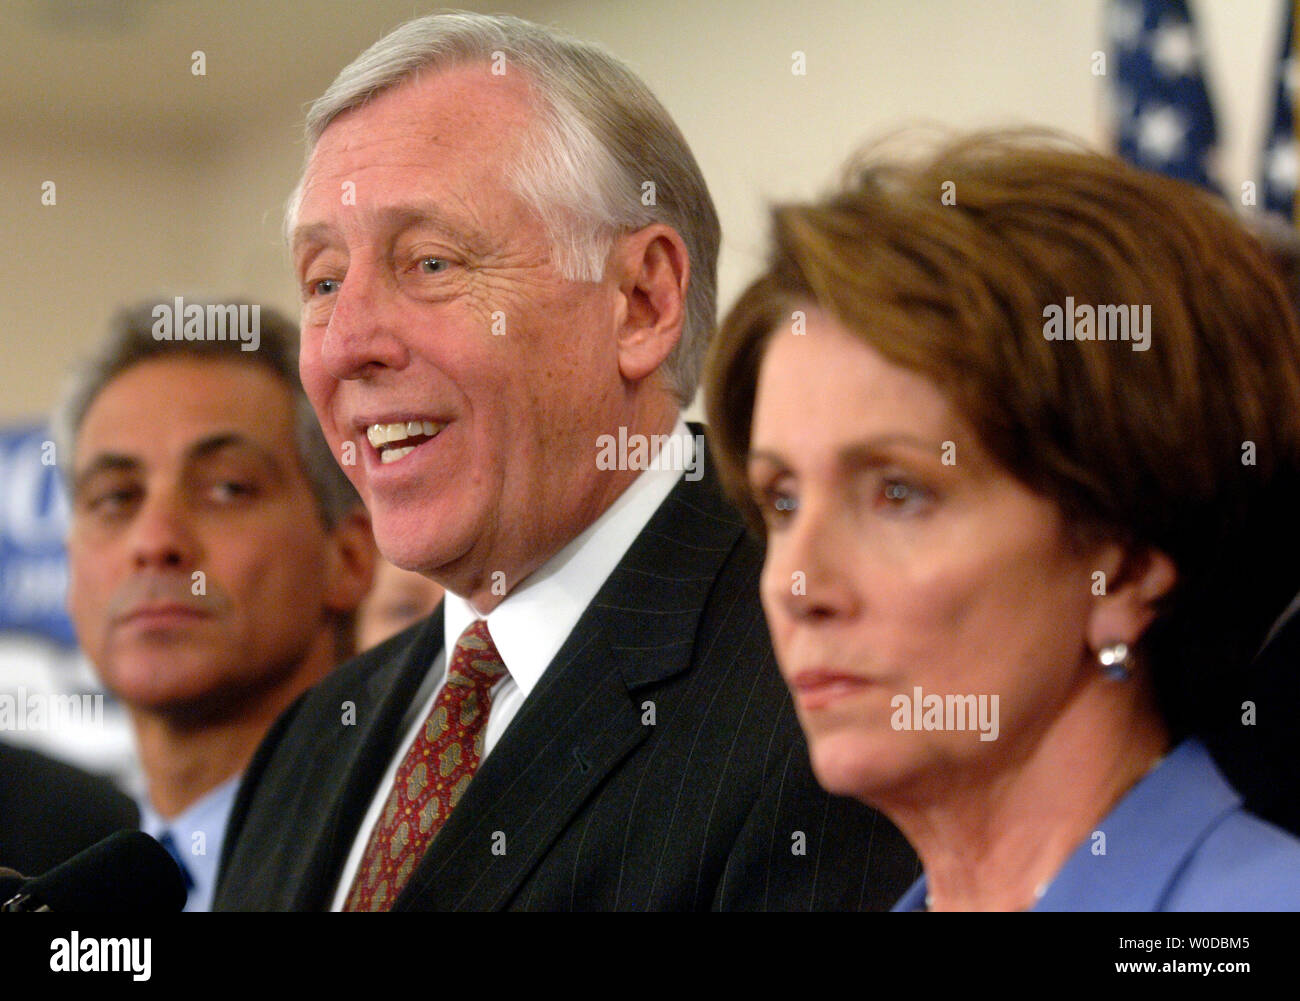 House Majority Leader Steny Hoyer (D-MD) (C) speaks alongside Speaker of the House Nancy Pelosi (D-CA) (R) and Rep. Rahm Emanuel (D-IL) at a press conference marking the first 100 legislative hours of the new Congress, in Washington on January 18, 2007. (UPI Photo/Kevin Dietsch) Stock Photo